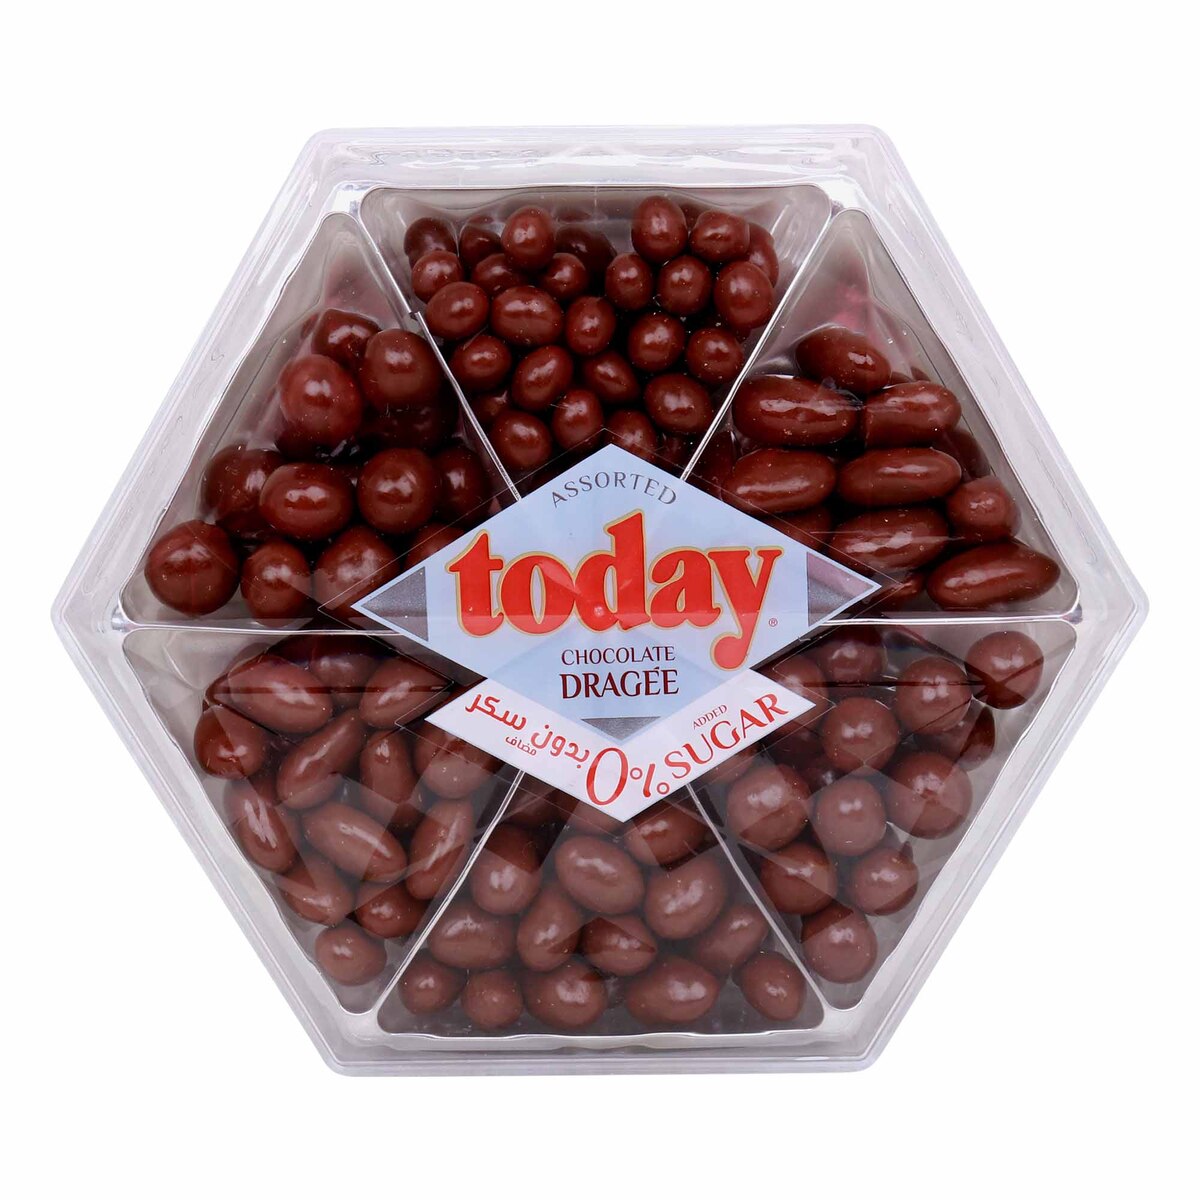 Today Chocolate Dragee, 450 g